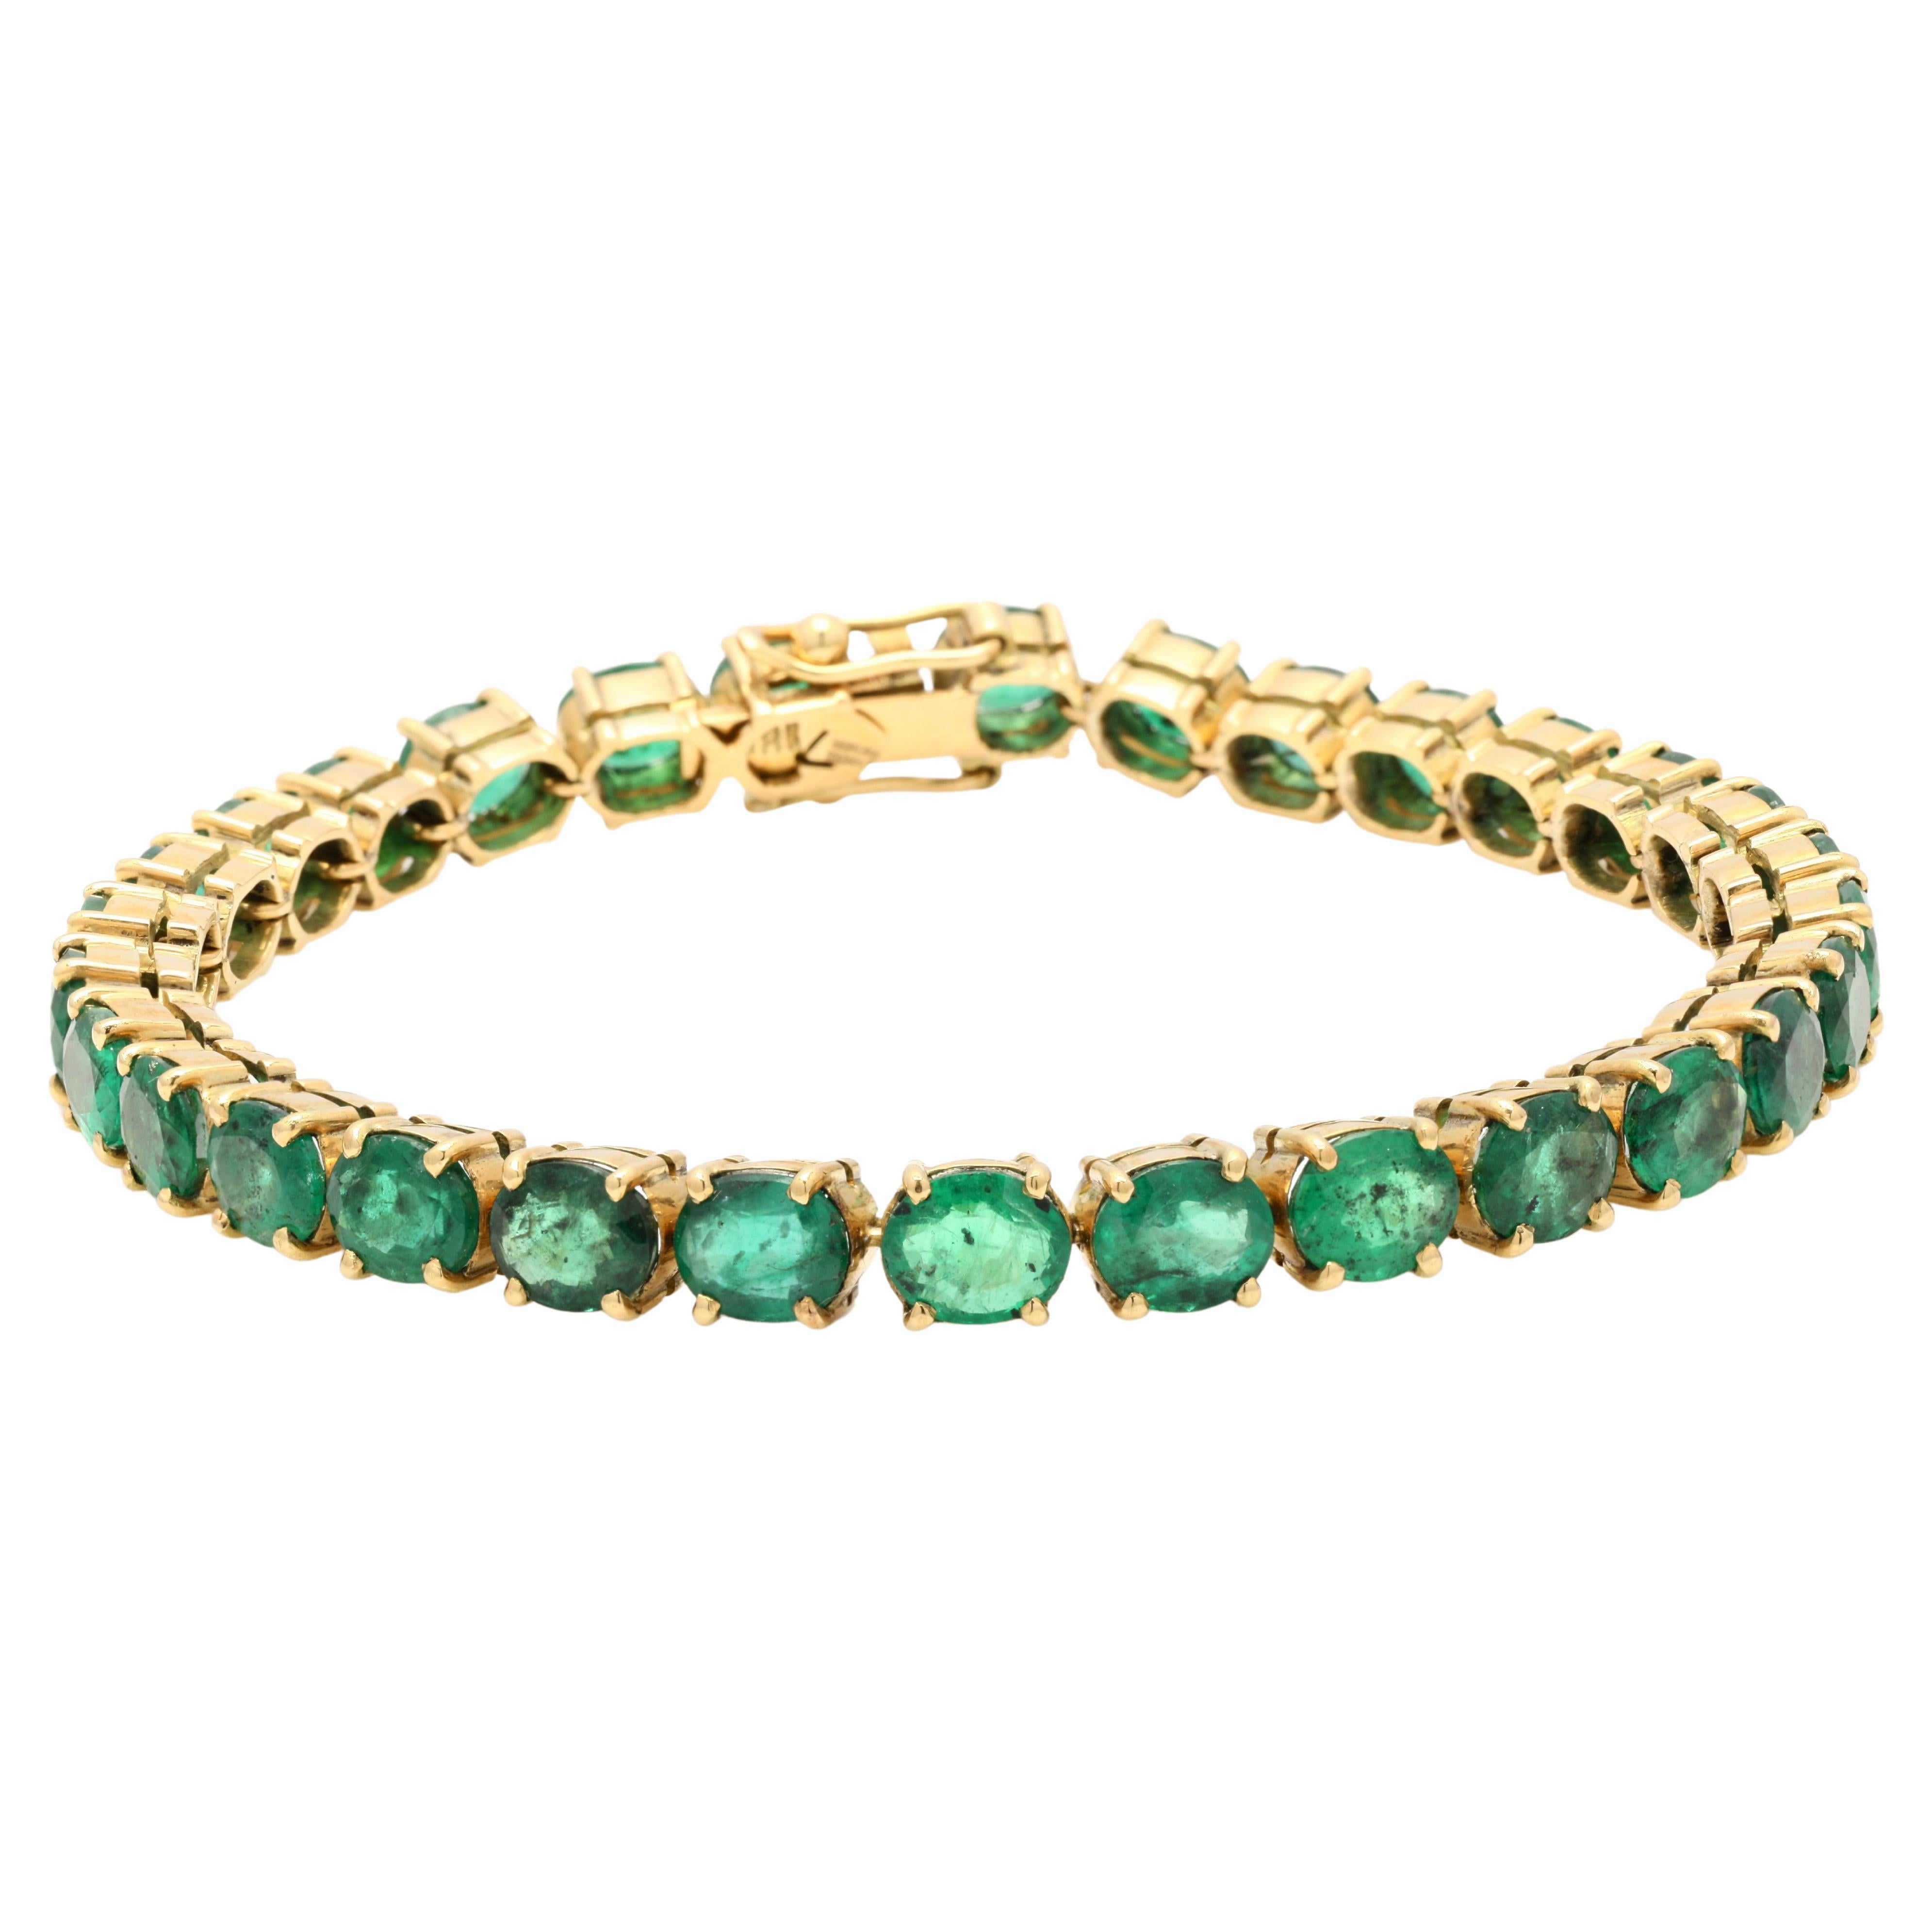 24.5ct Oval Green Emerald Gemstone Bracelet Inlaid in 14K Yellow Gold Settings